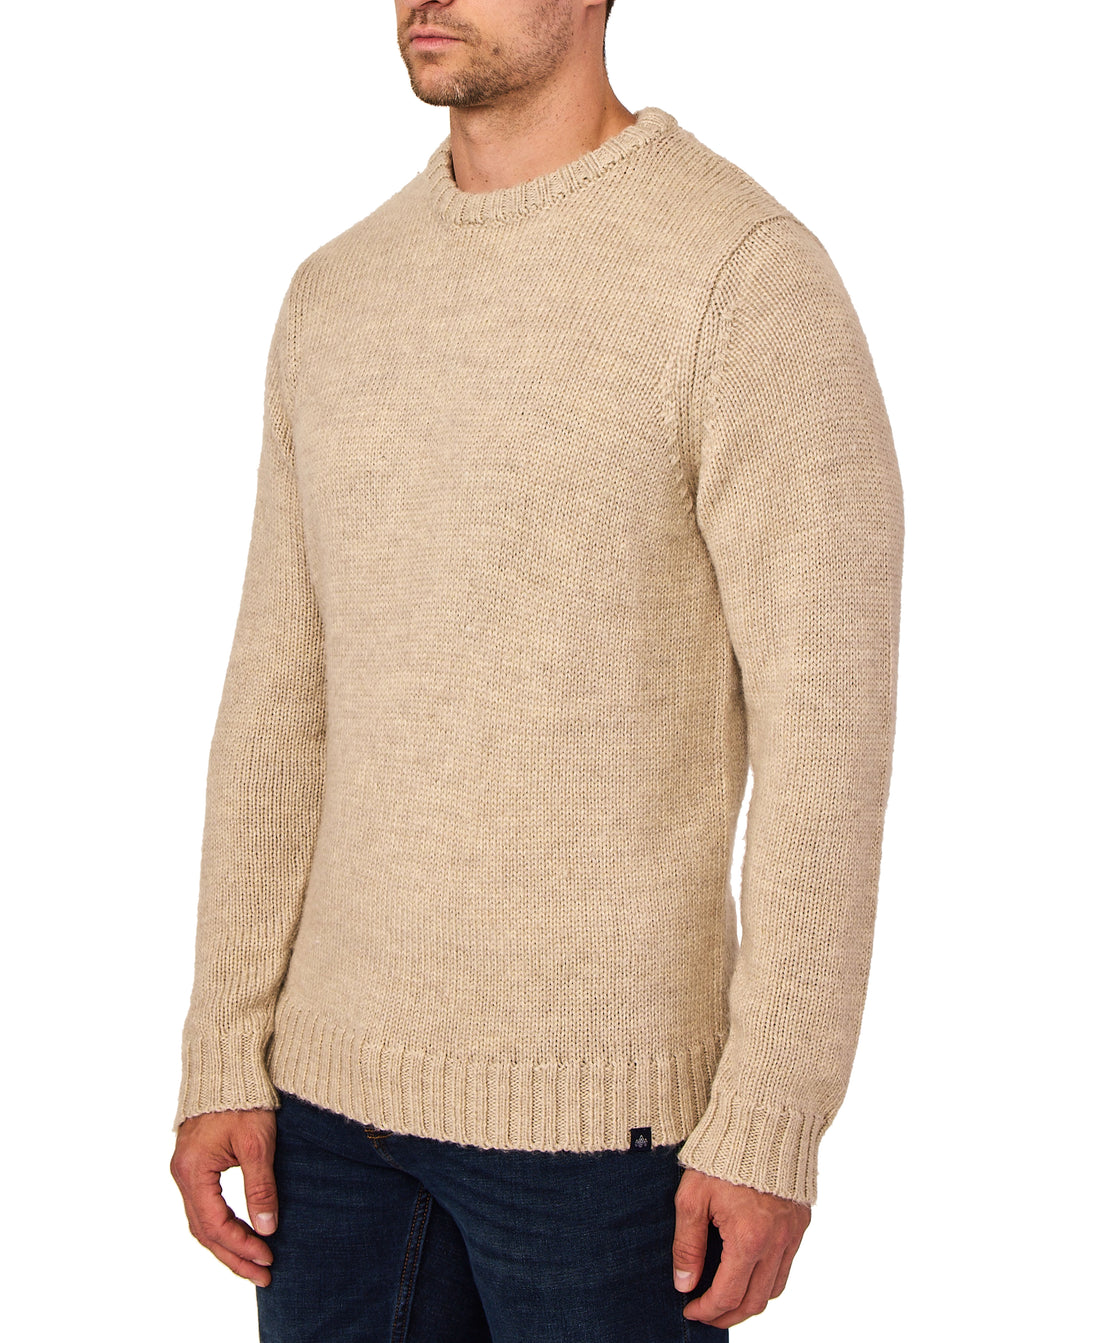 THE AVALANCHE CREW NECK SWEATER